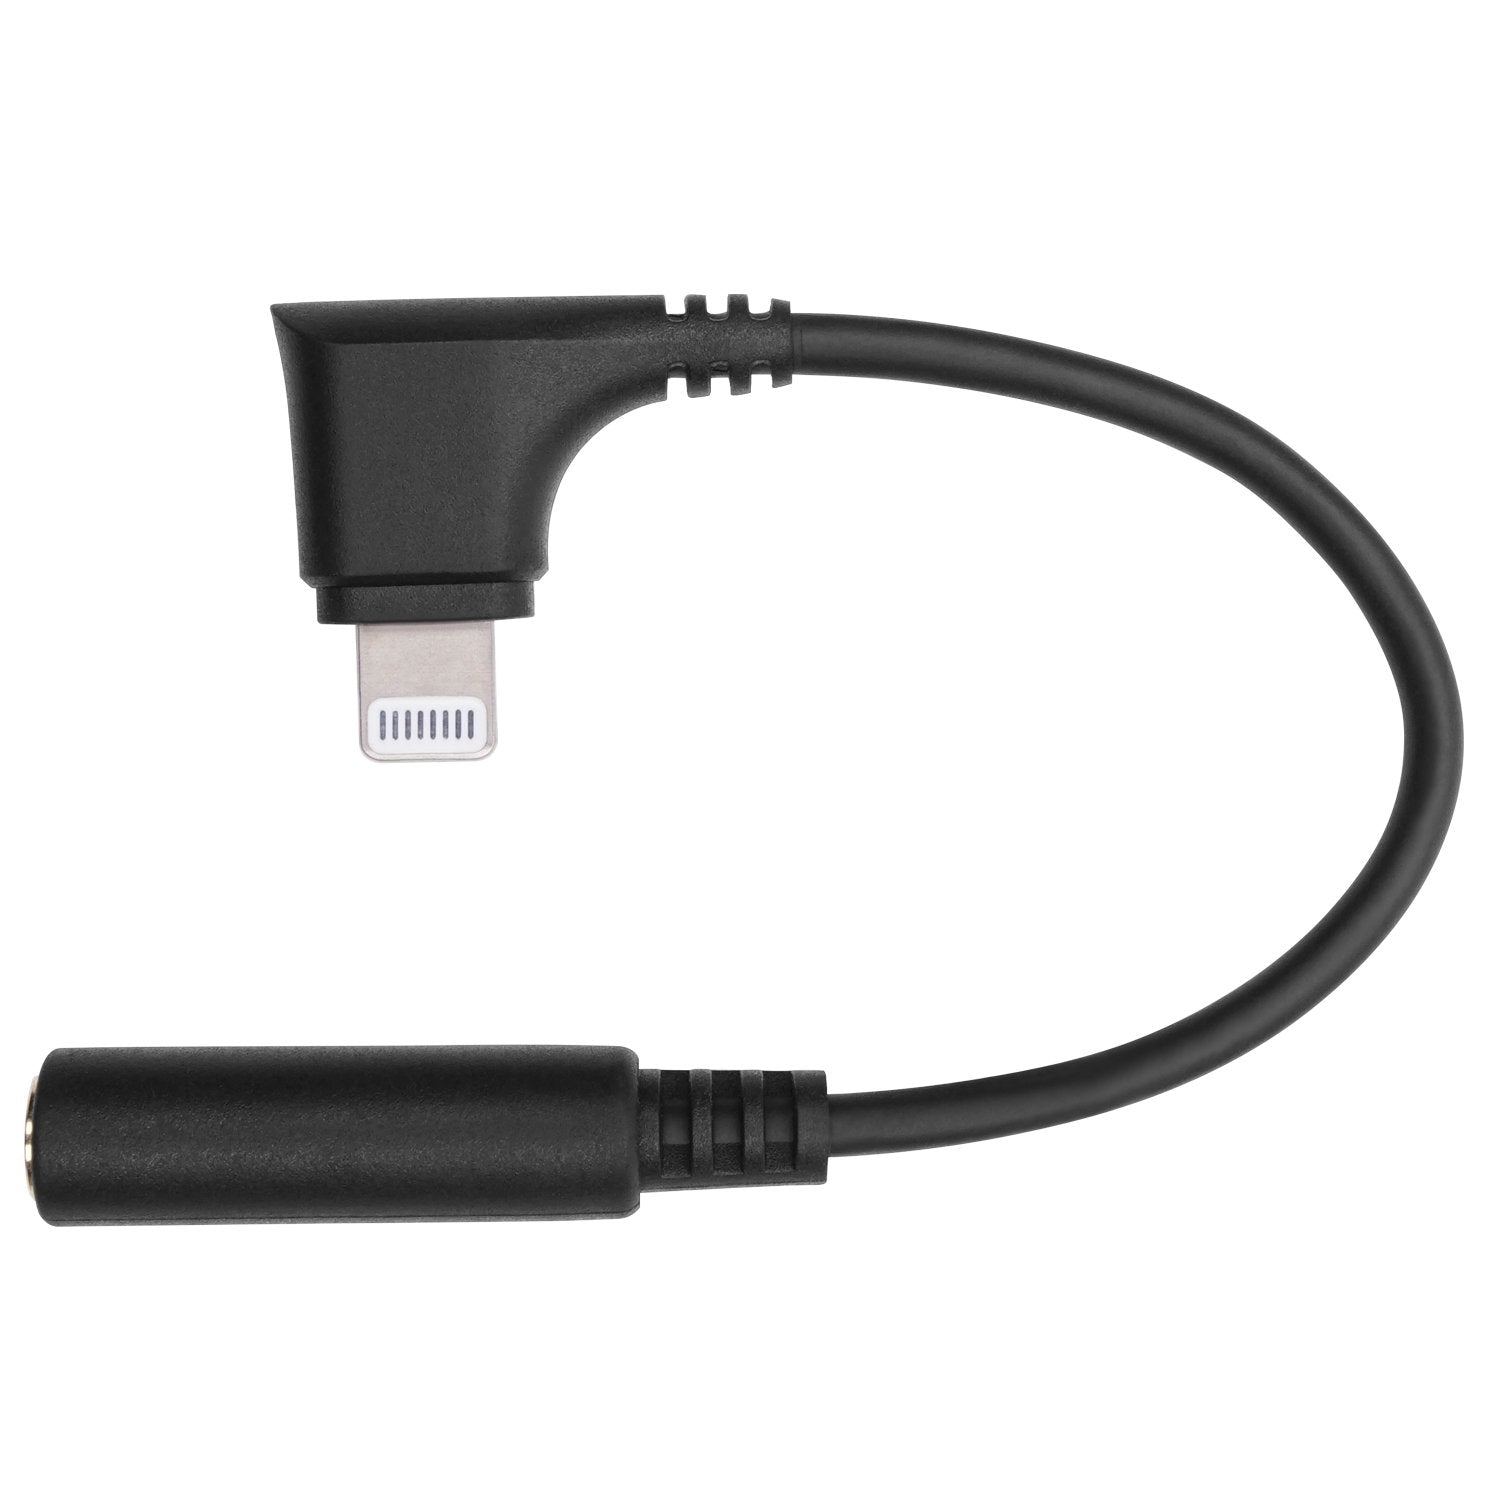 IMA-3 | TRRS Microphone Dongle for Apple Products | Movo